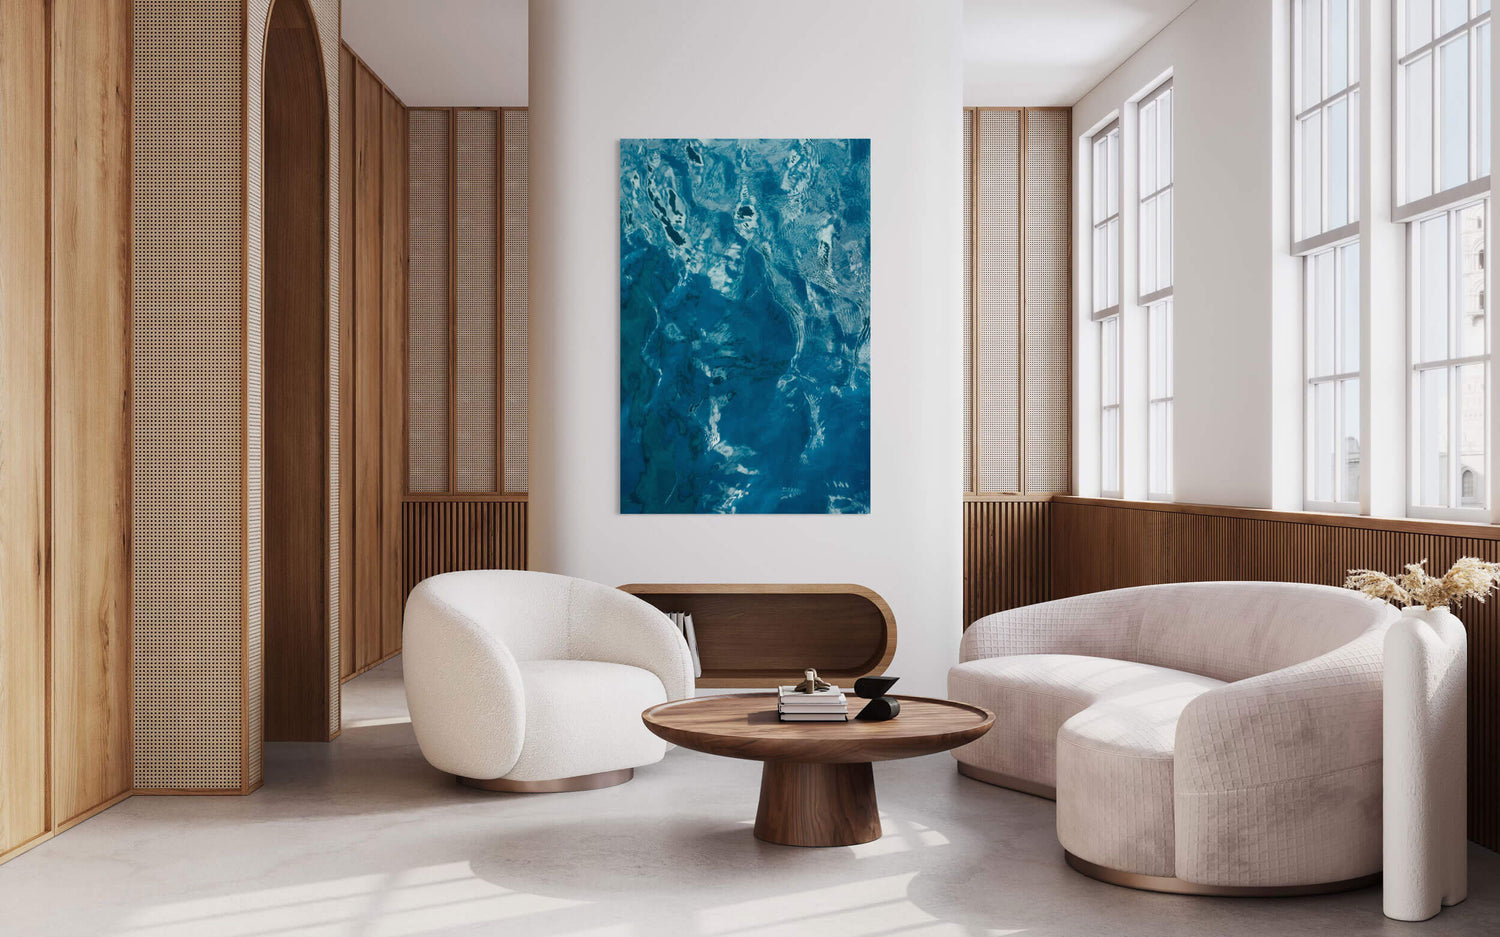 A Kauai picture of the beautiful ocean colors hangs in a living room.